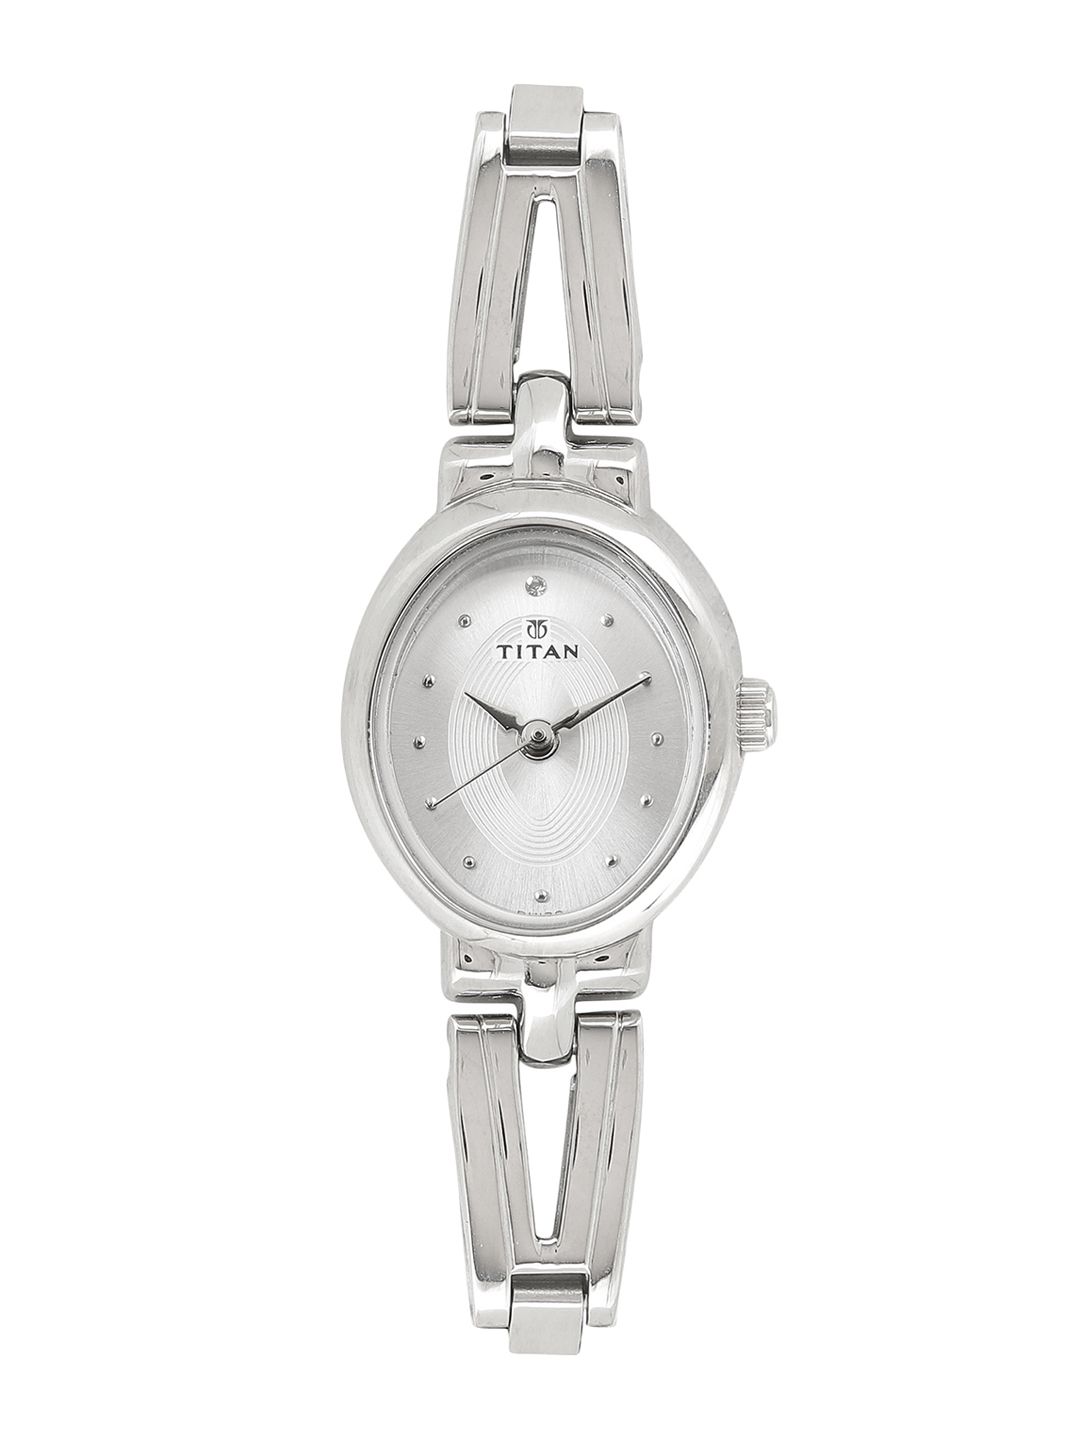 Titan Women Silver-Toned Analogue Watch 2594SM01 Price in India